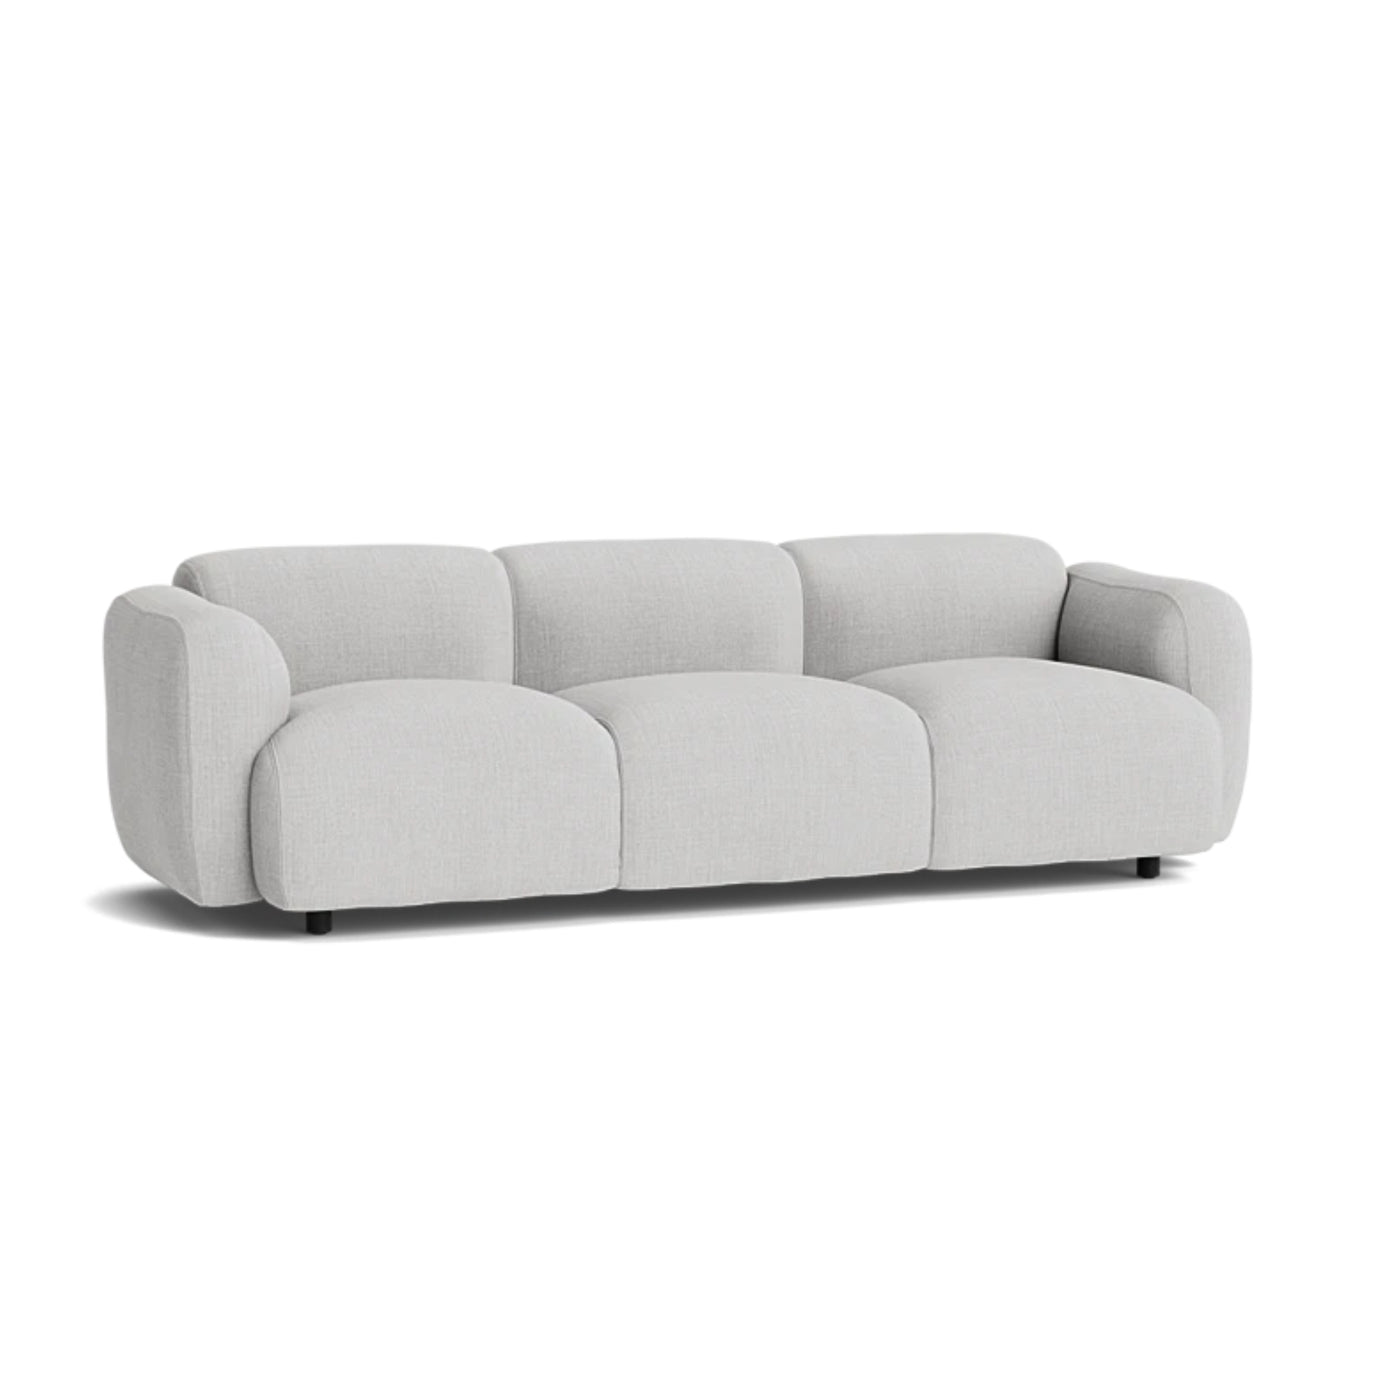 Normann Copenhagen Swell 3 Seater Sofa at someday designs. #colour_remix-123